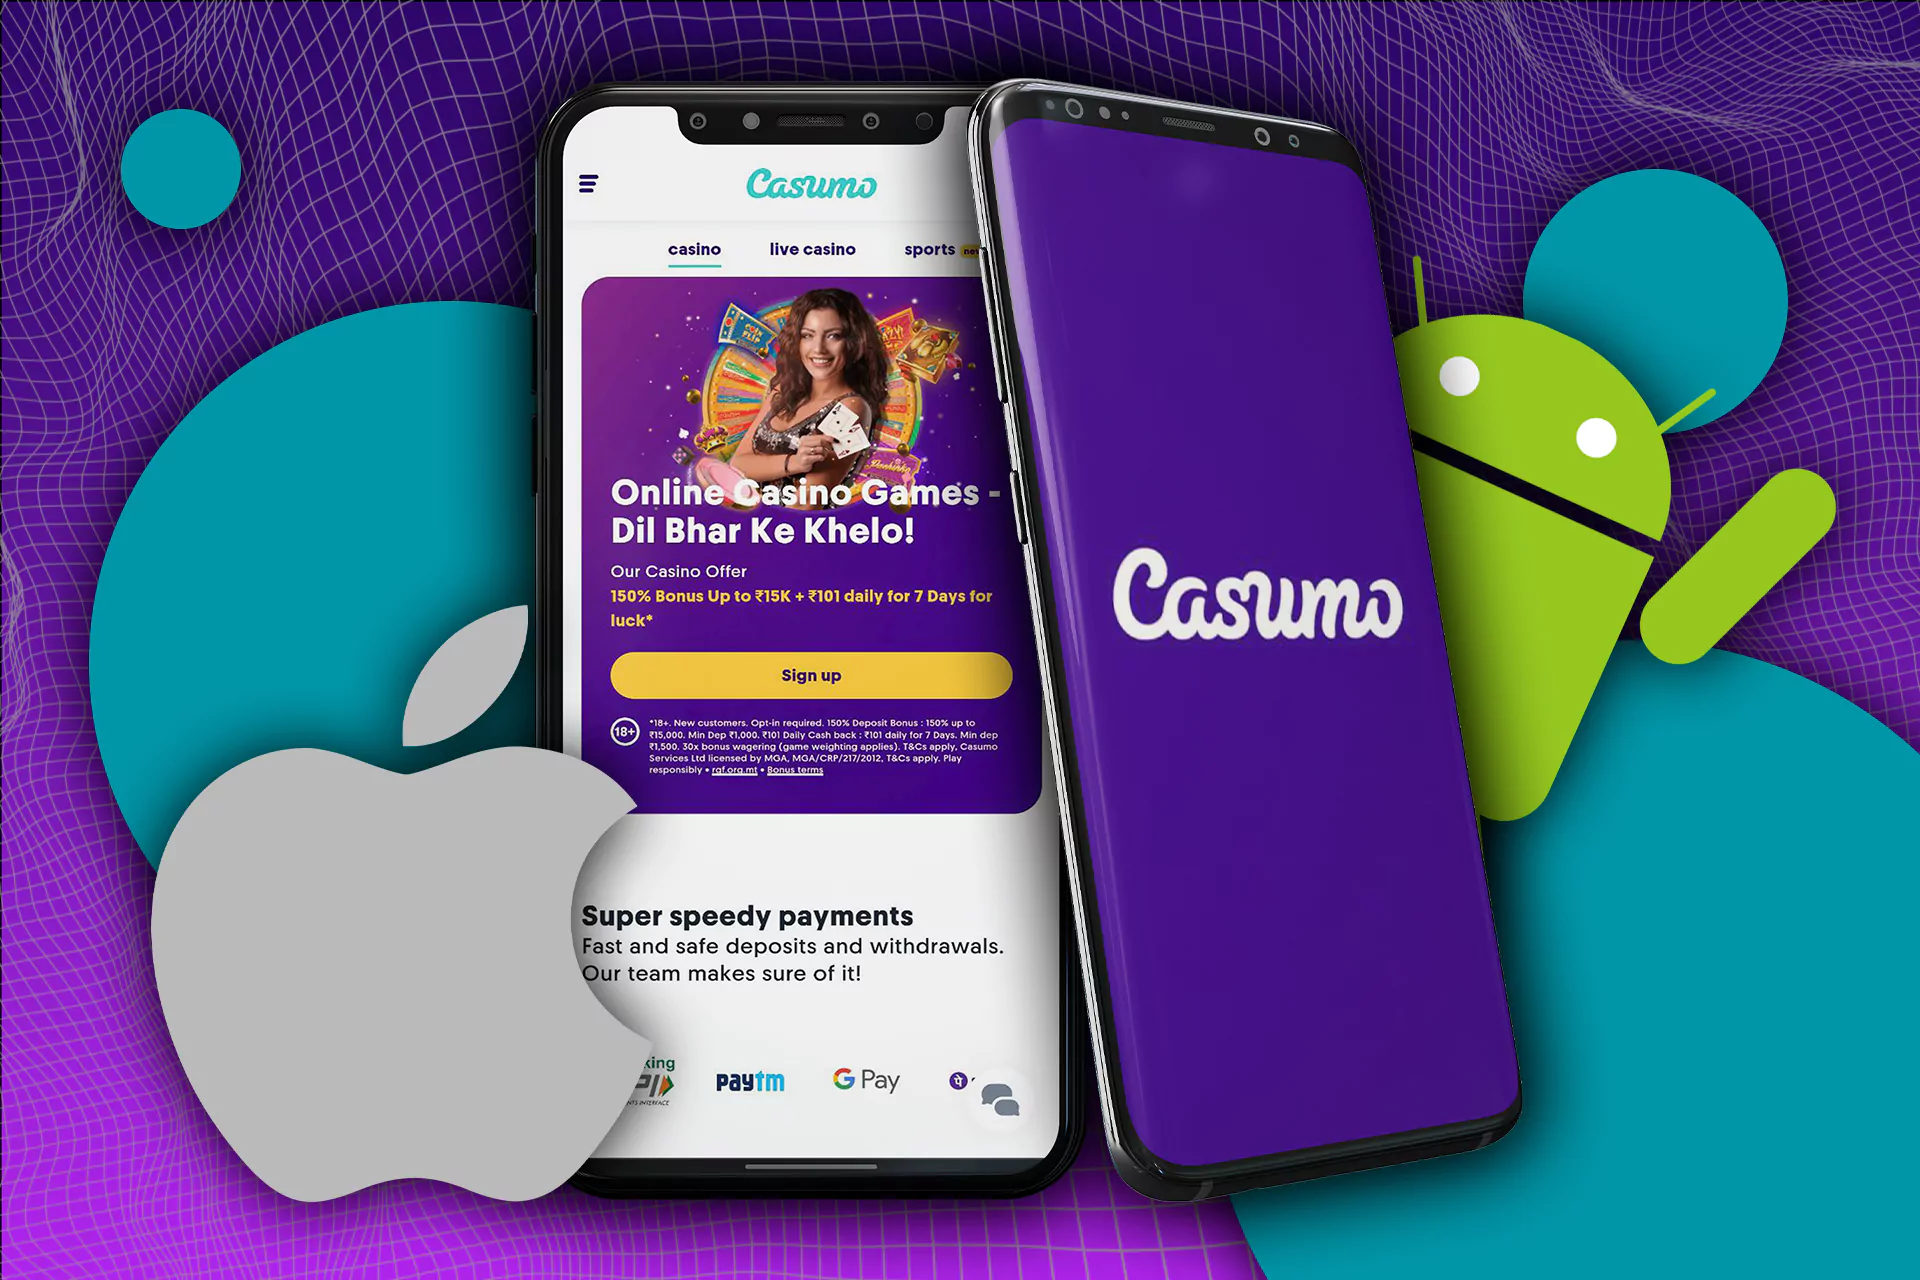 Download the Casumo app to bet wherever you want.